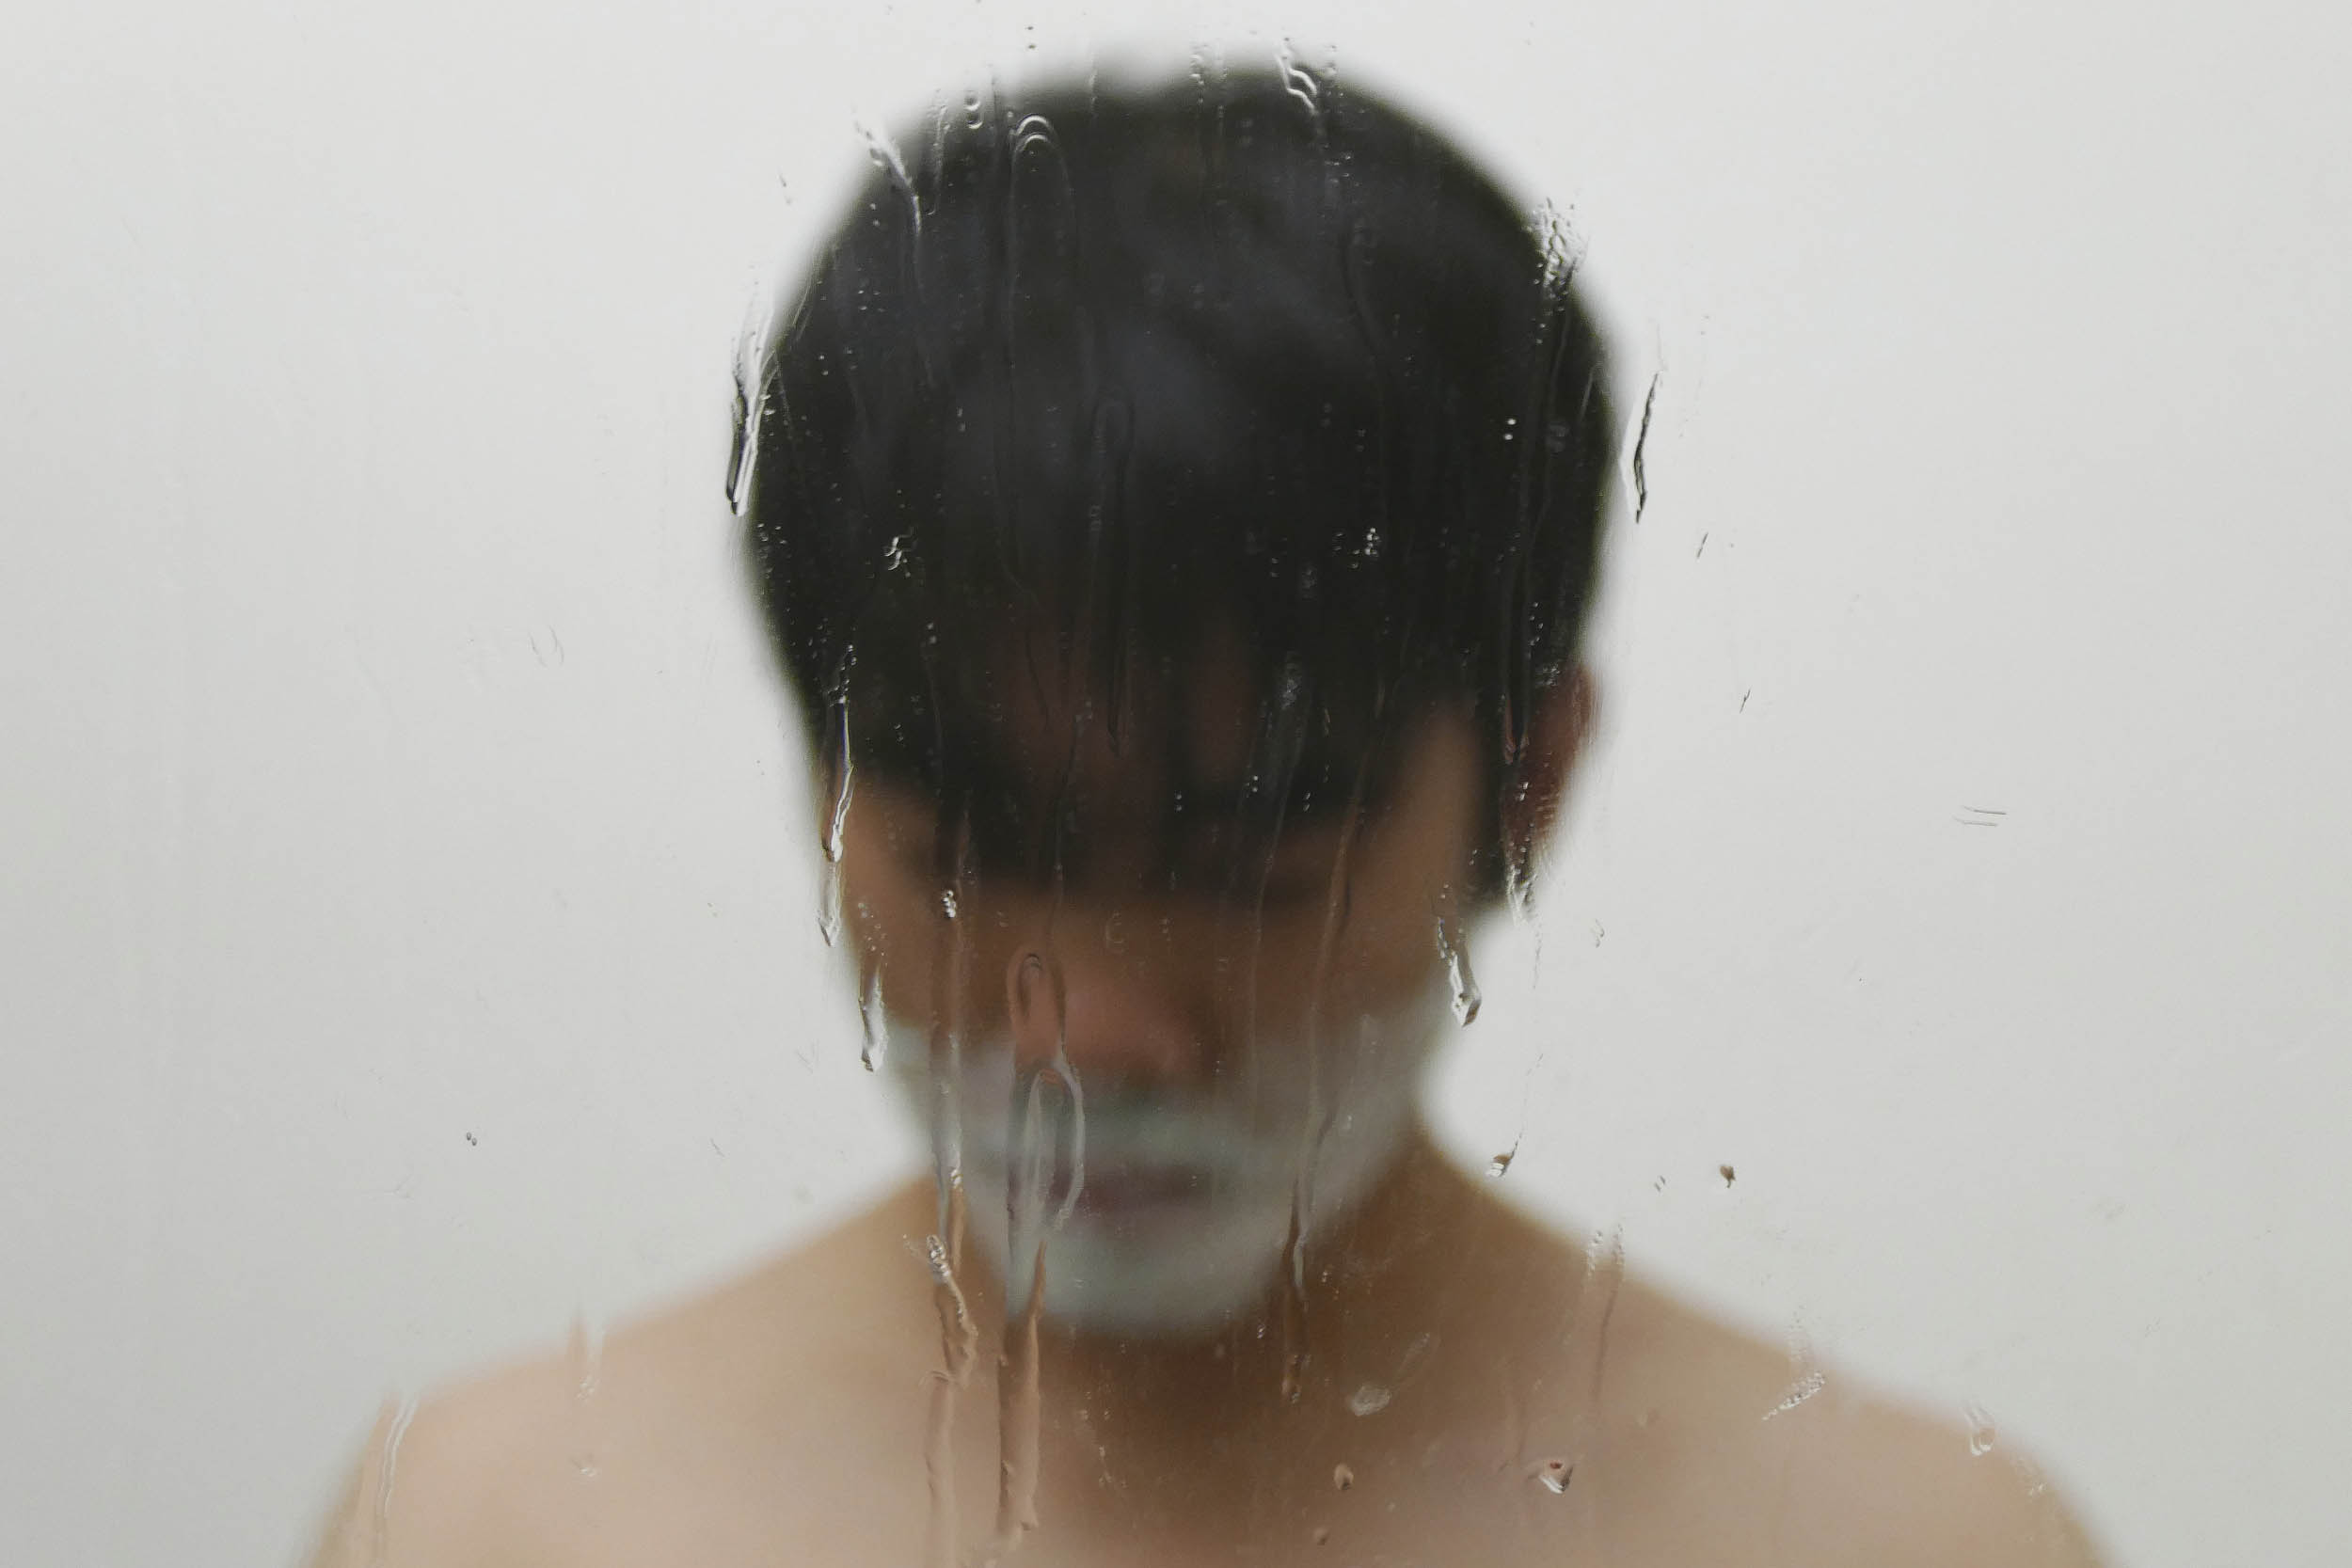 Winston Tang shaving in a mirror with water running down the mirror